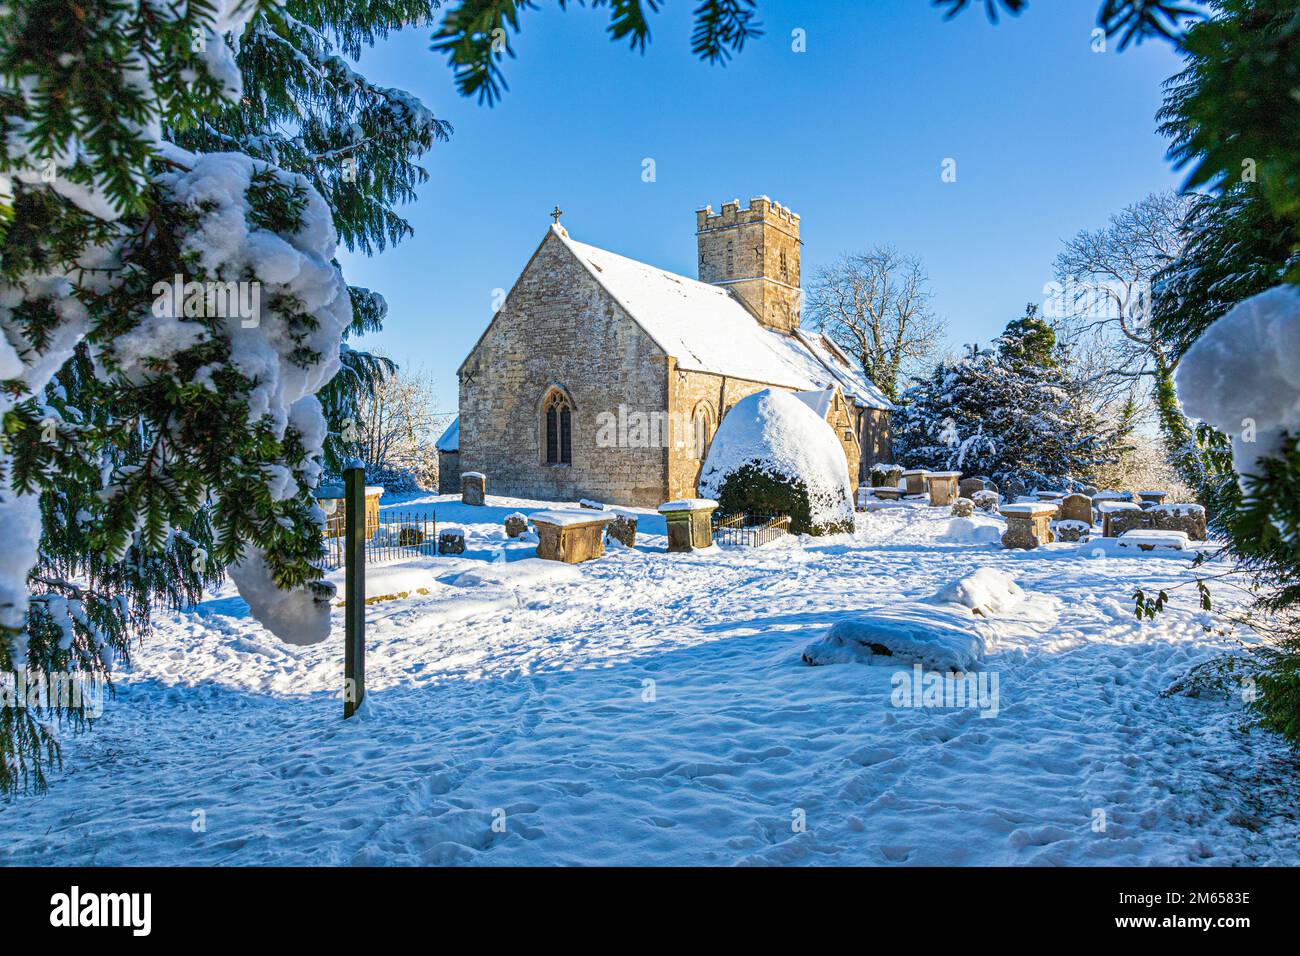 Early winter snow at the 12th century St Michael & All Angels church in the Cotswold village of Brimpsfield, Gloucestershire, England UK Stock Photo